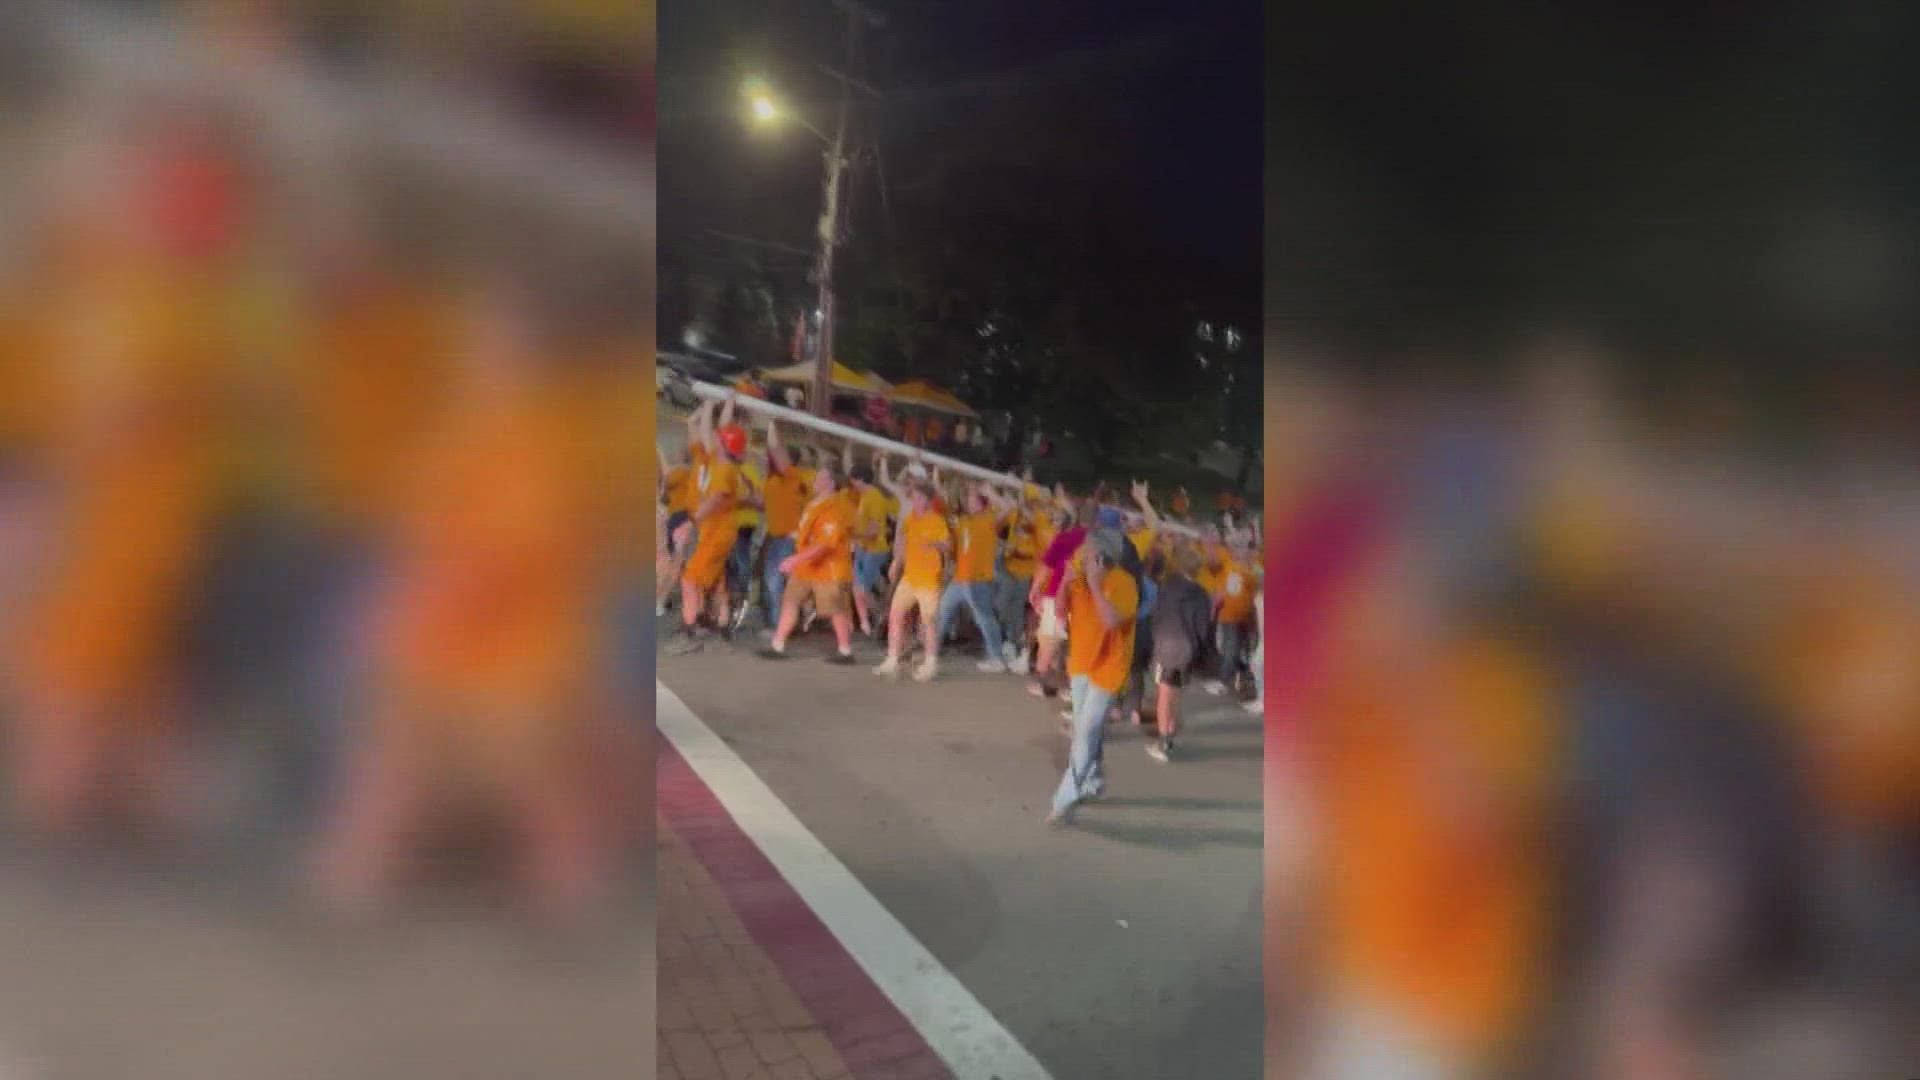 On Saturday, Vol fans tore them down during the massive celebration inside Neyland Stadium. One ended up at a fraternity house and another took a swim.